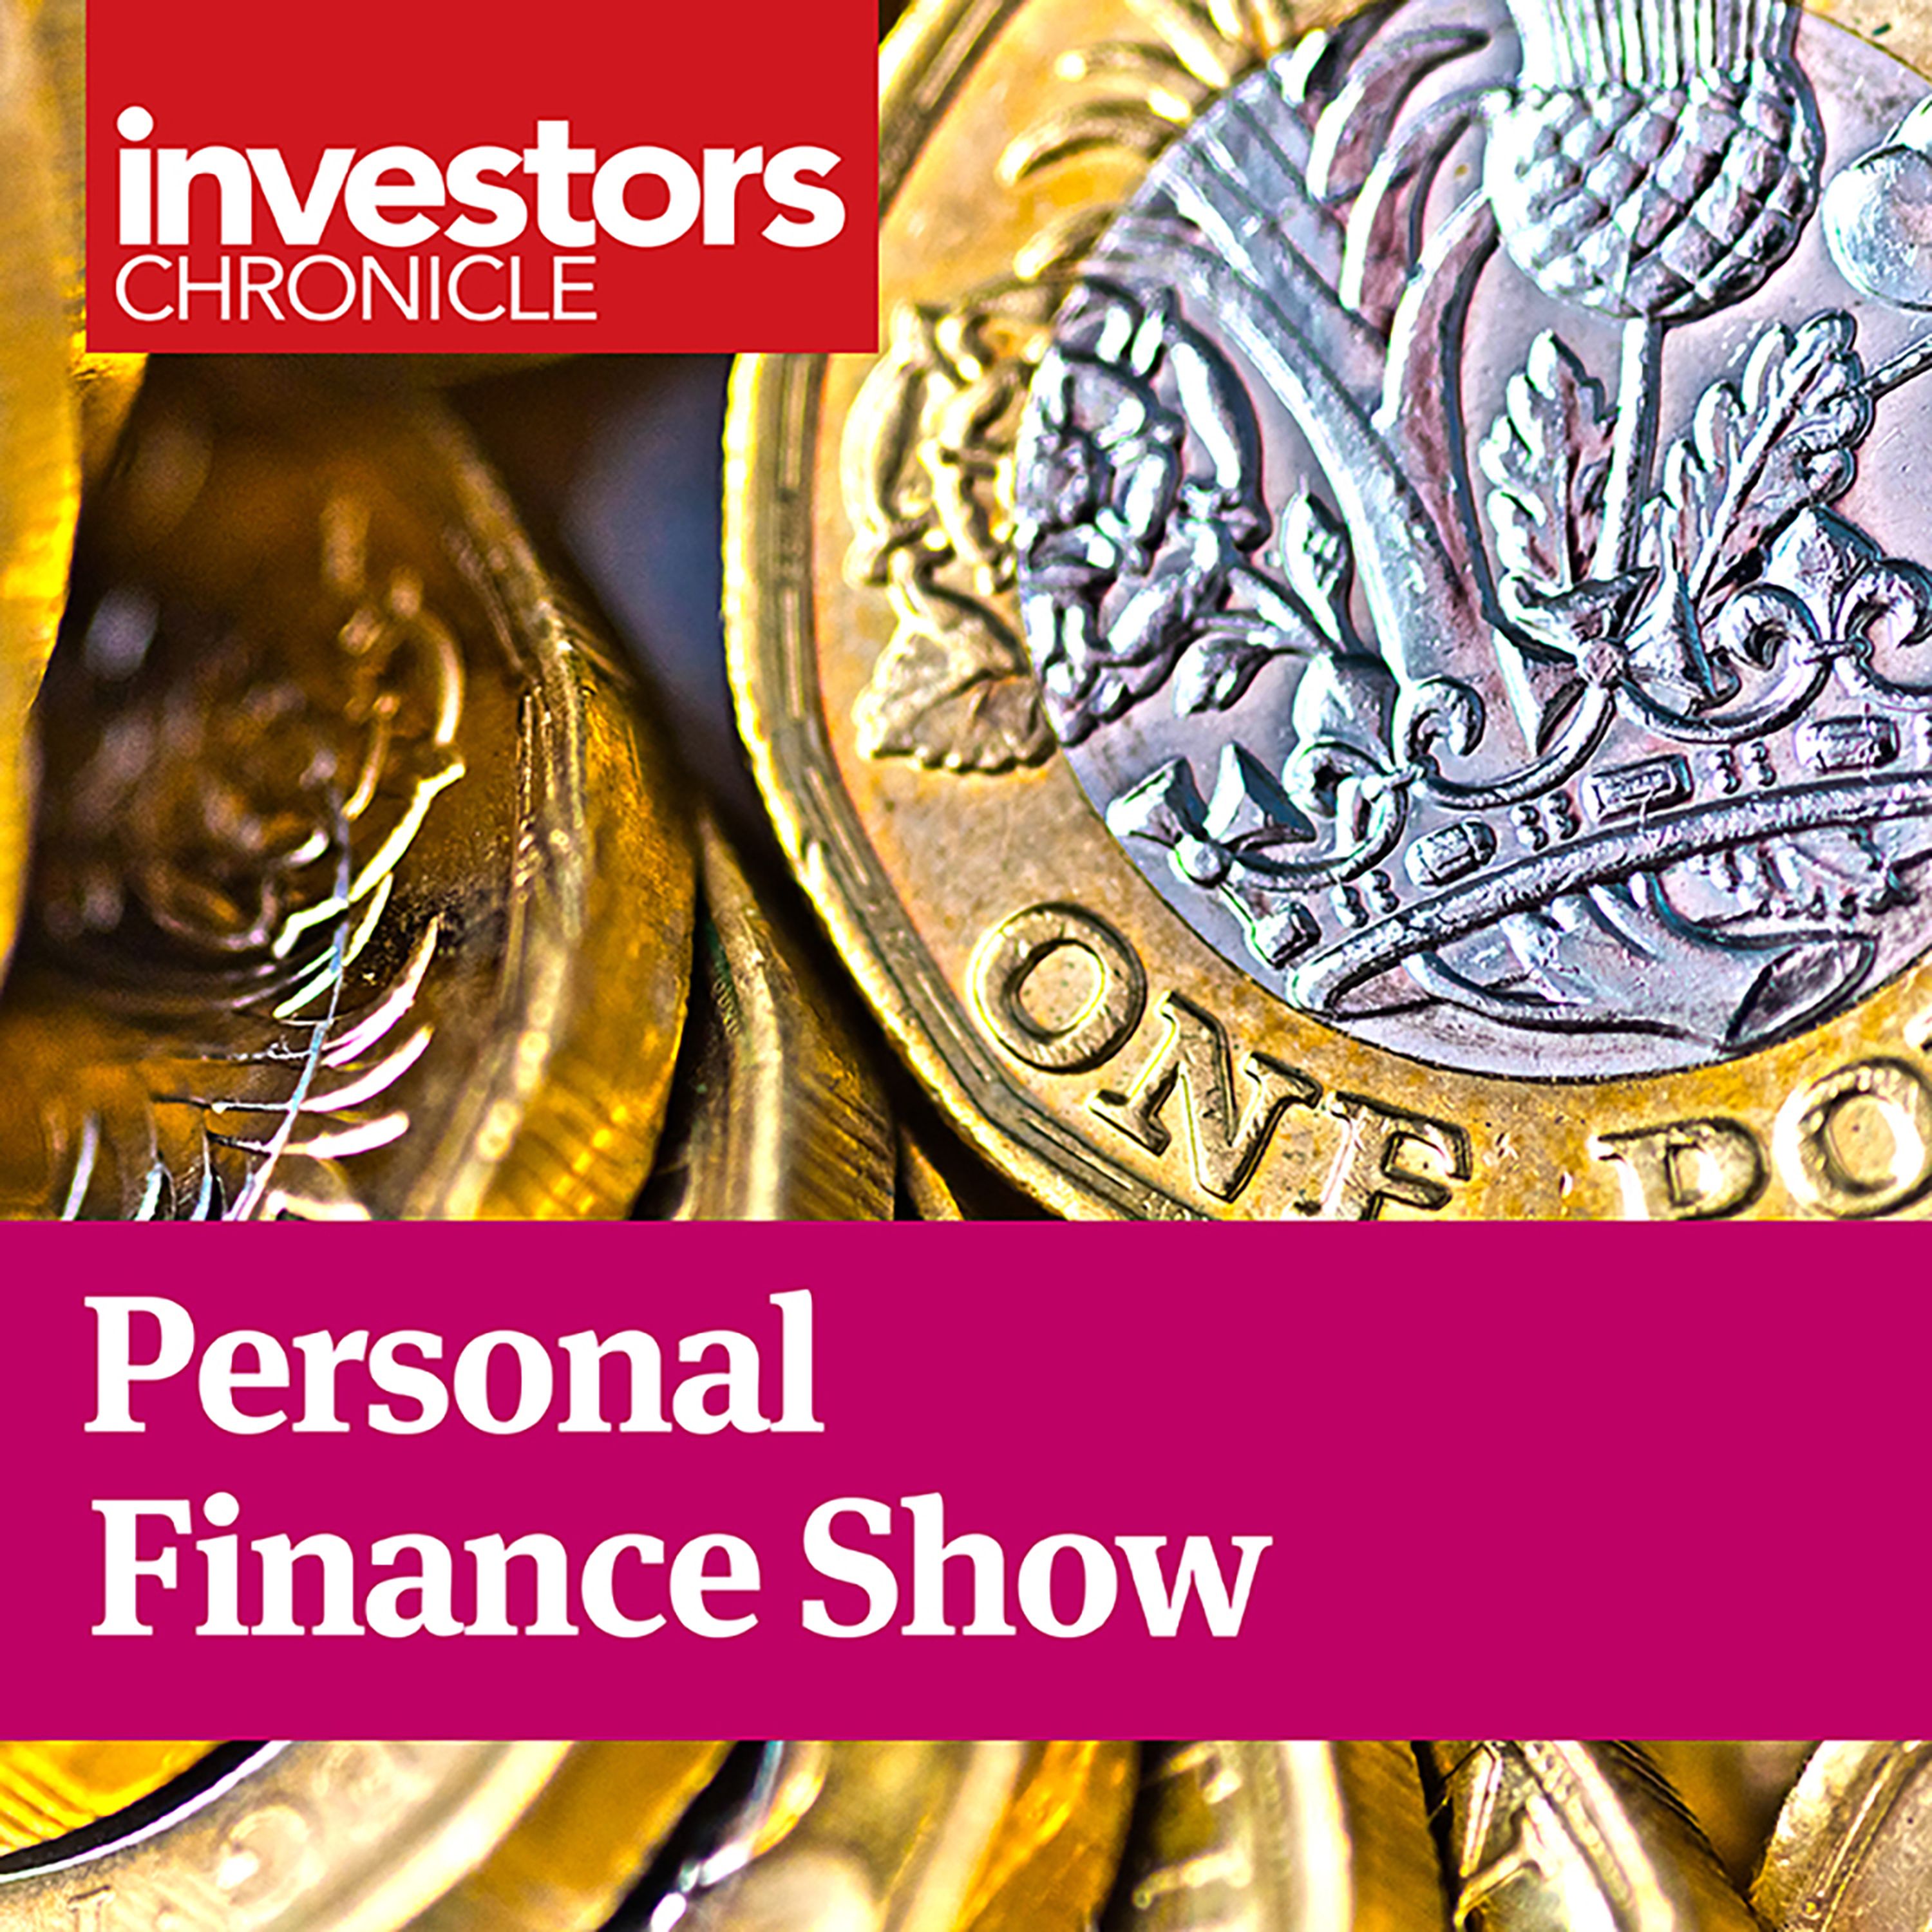 Personal Finance Show: Unearthing the best private equity and how to get a head start on retirement